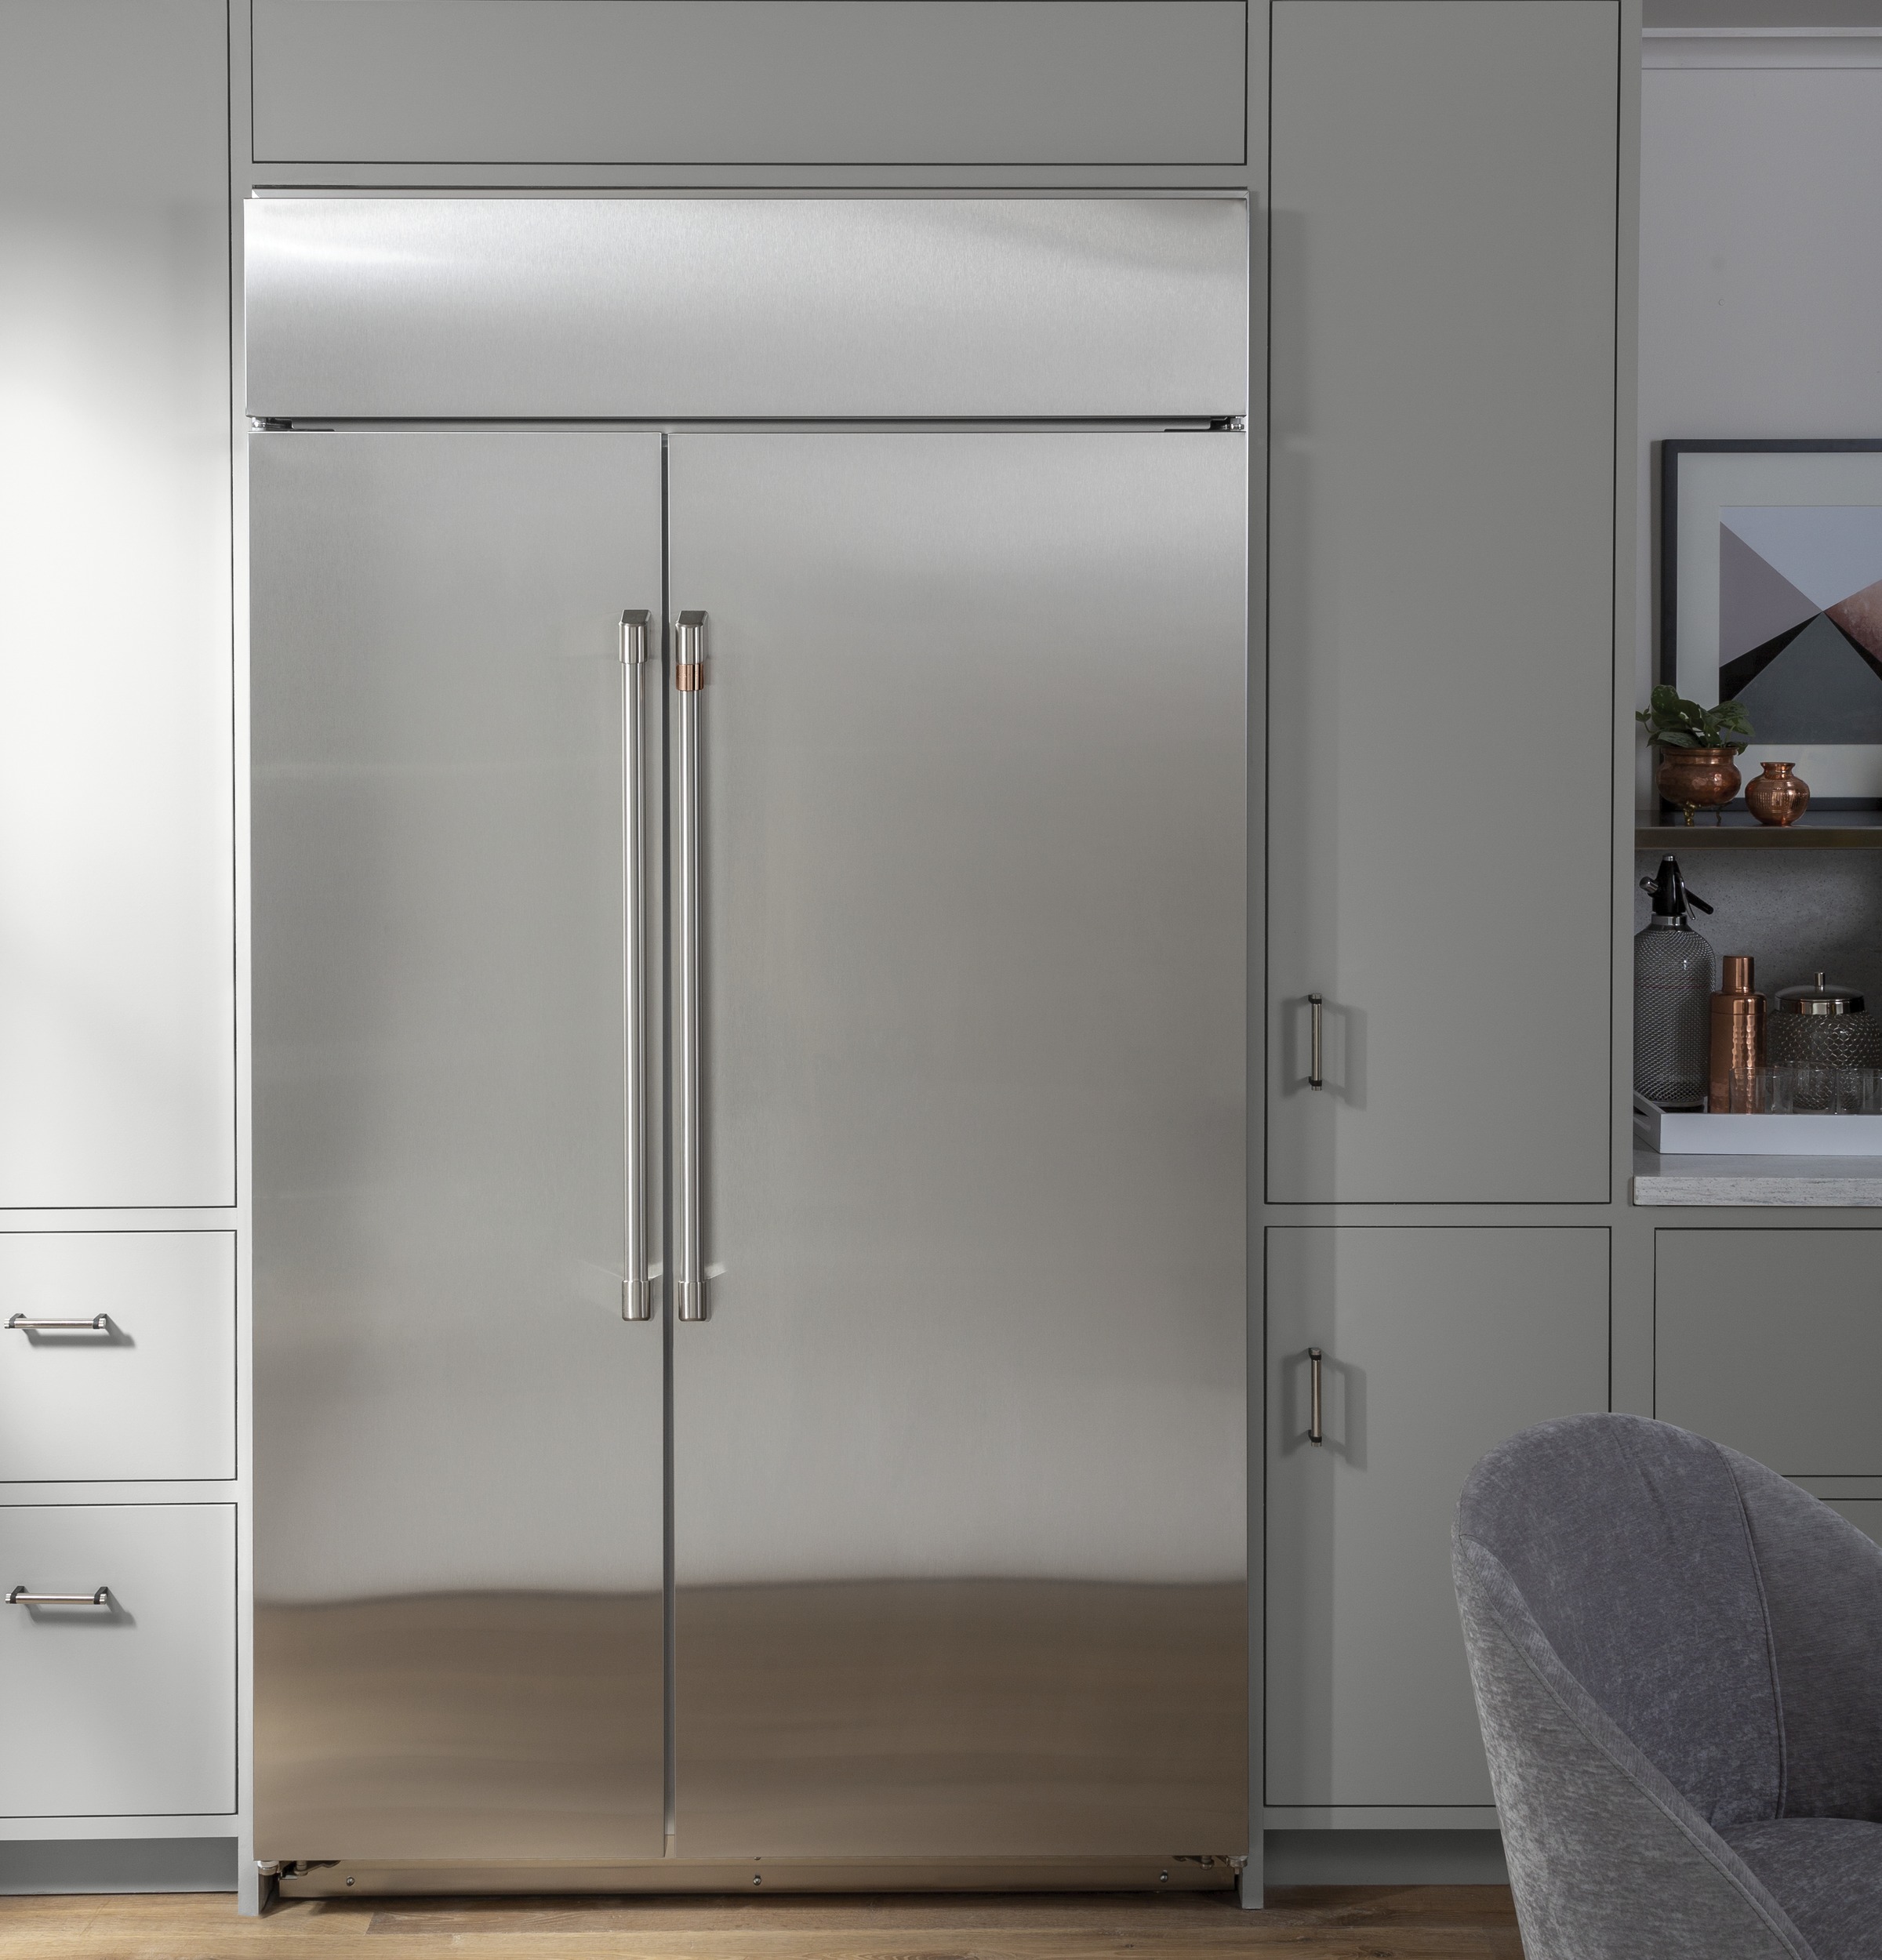 A refrigerator that speaks to your style